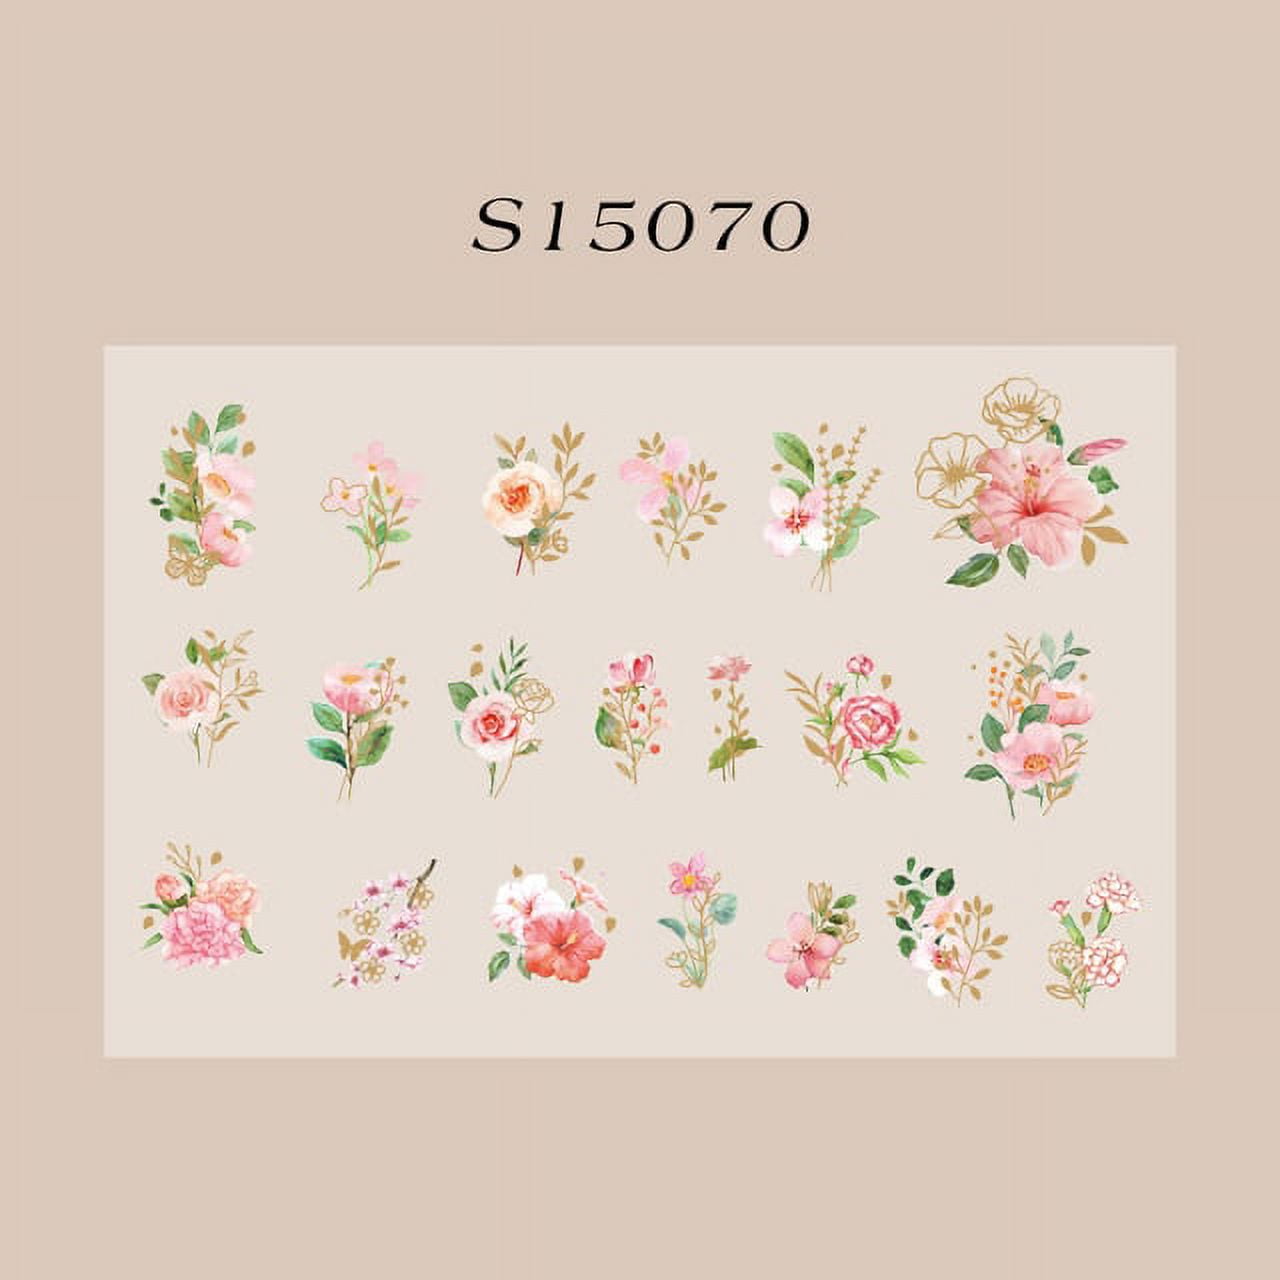 Sticker Pack / 60 Pc. Vintage Style Botanical Stickers Flowers